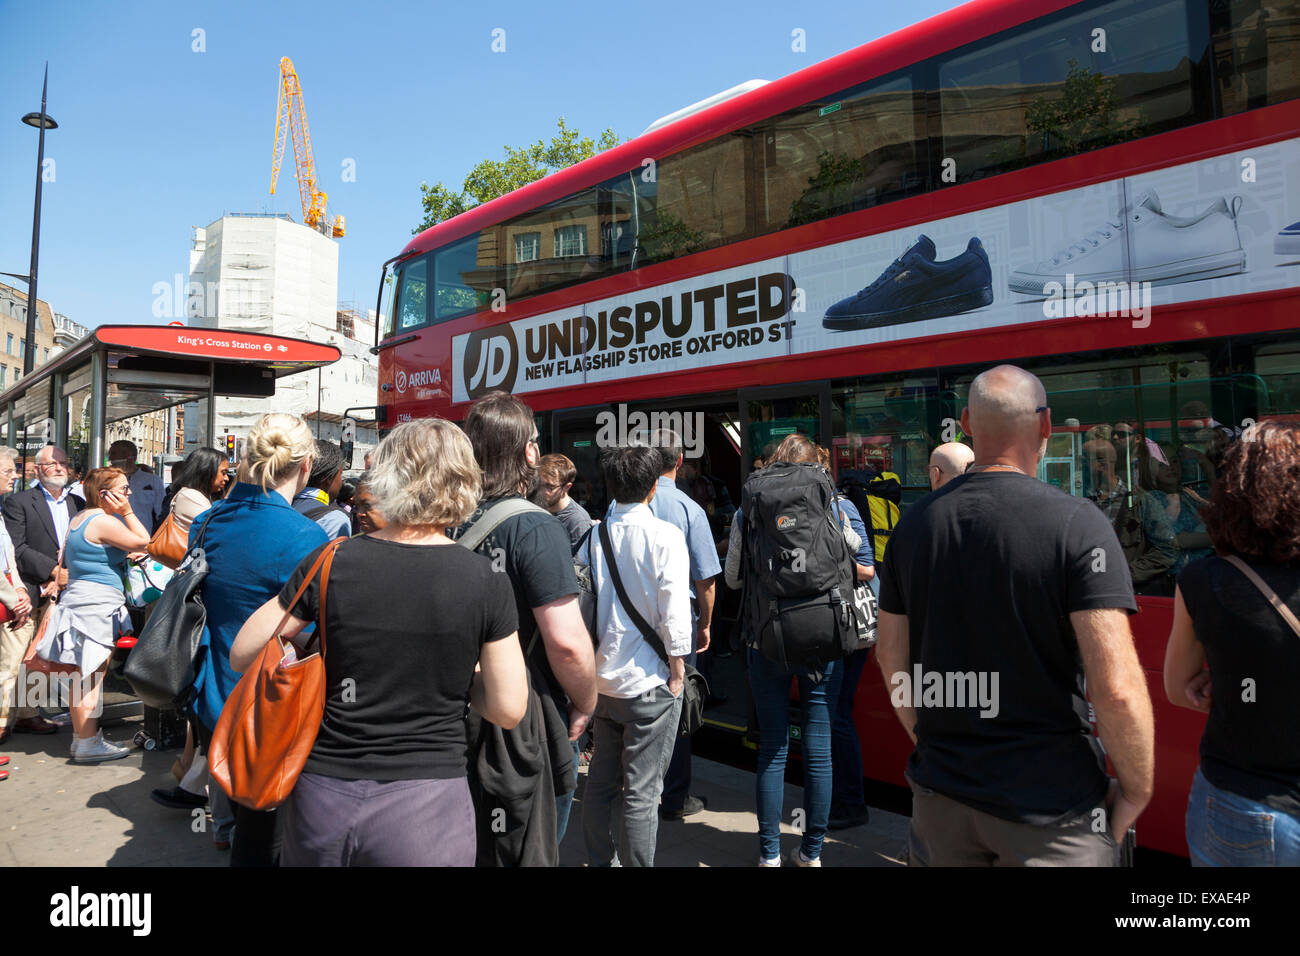 London, UK. 9 July 2015 - The biggest strike on the London Underground in 13 years is causing commuter chaos across the city. At St Pancras International and King's Cross stations both travelers arriving on the Eurostar and national rail trains, as well as regular Londoner's are stuck on crowded bus stops and packed buses. Credit: Nathaniel Noir/Alamy Live News Stock Photo